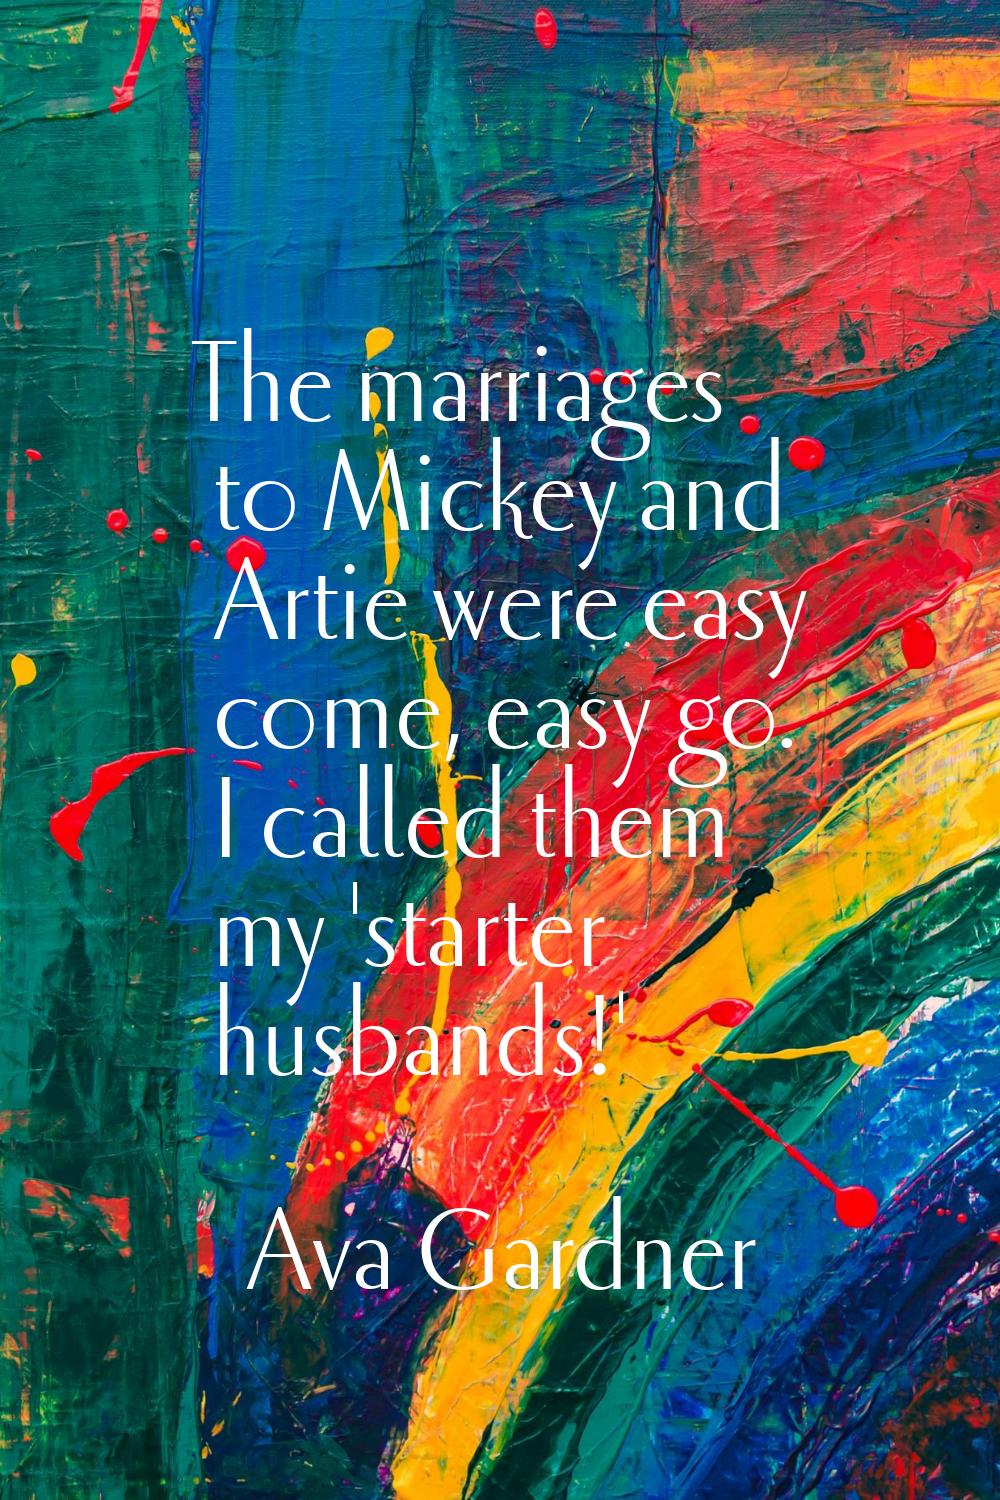 The marriages to Mickey and Artie were easy come, easy go. I called them my 'starter husbands!'